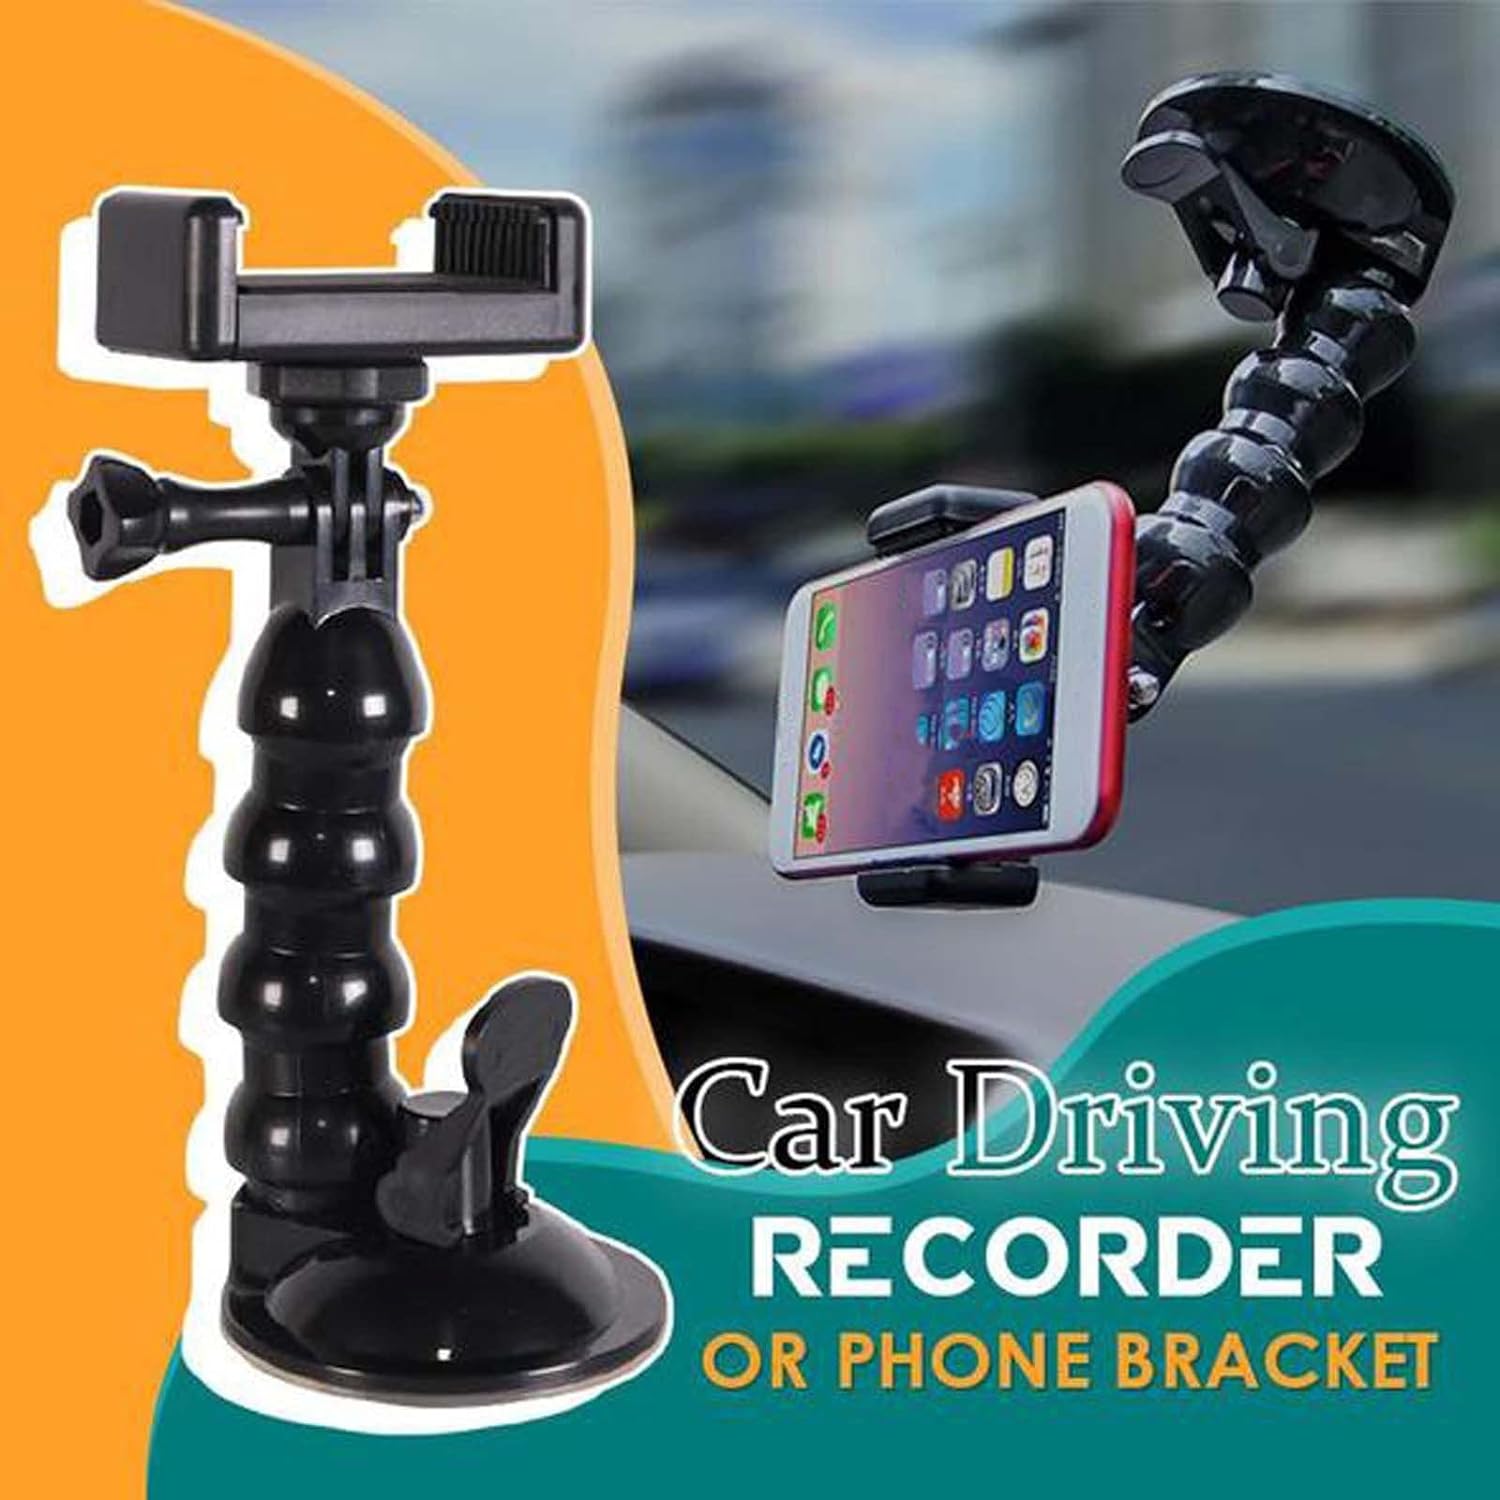 SkyShopy  Universal Snake Suction Cup Phone Holder for Car Cup Holder Phone Mount with Expandable Base for Car Truck, Adjustable Cell Phone Holder Car,Compatible with iPhone Samsung All Phones